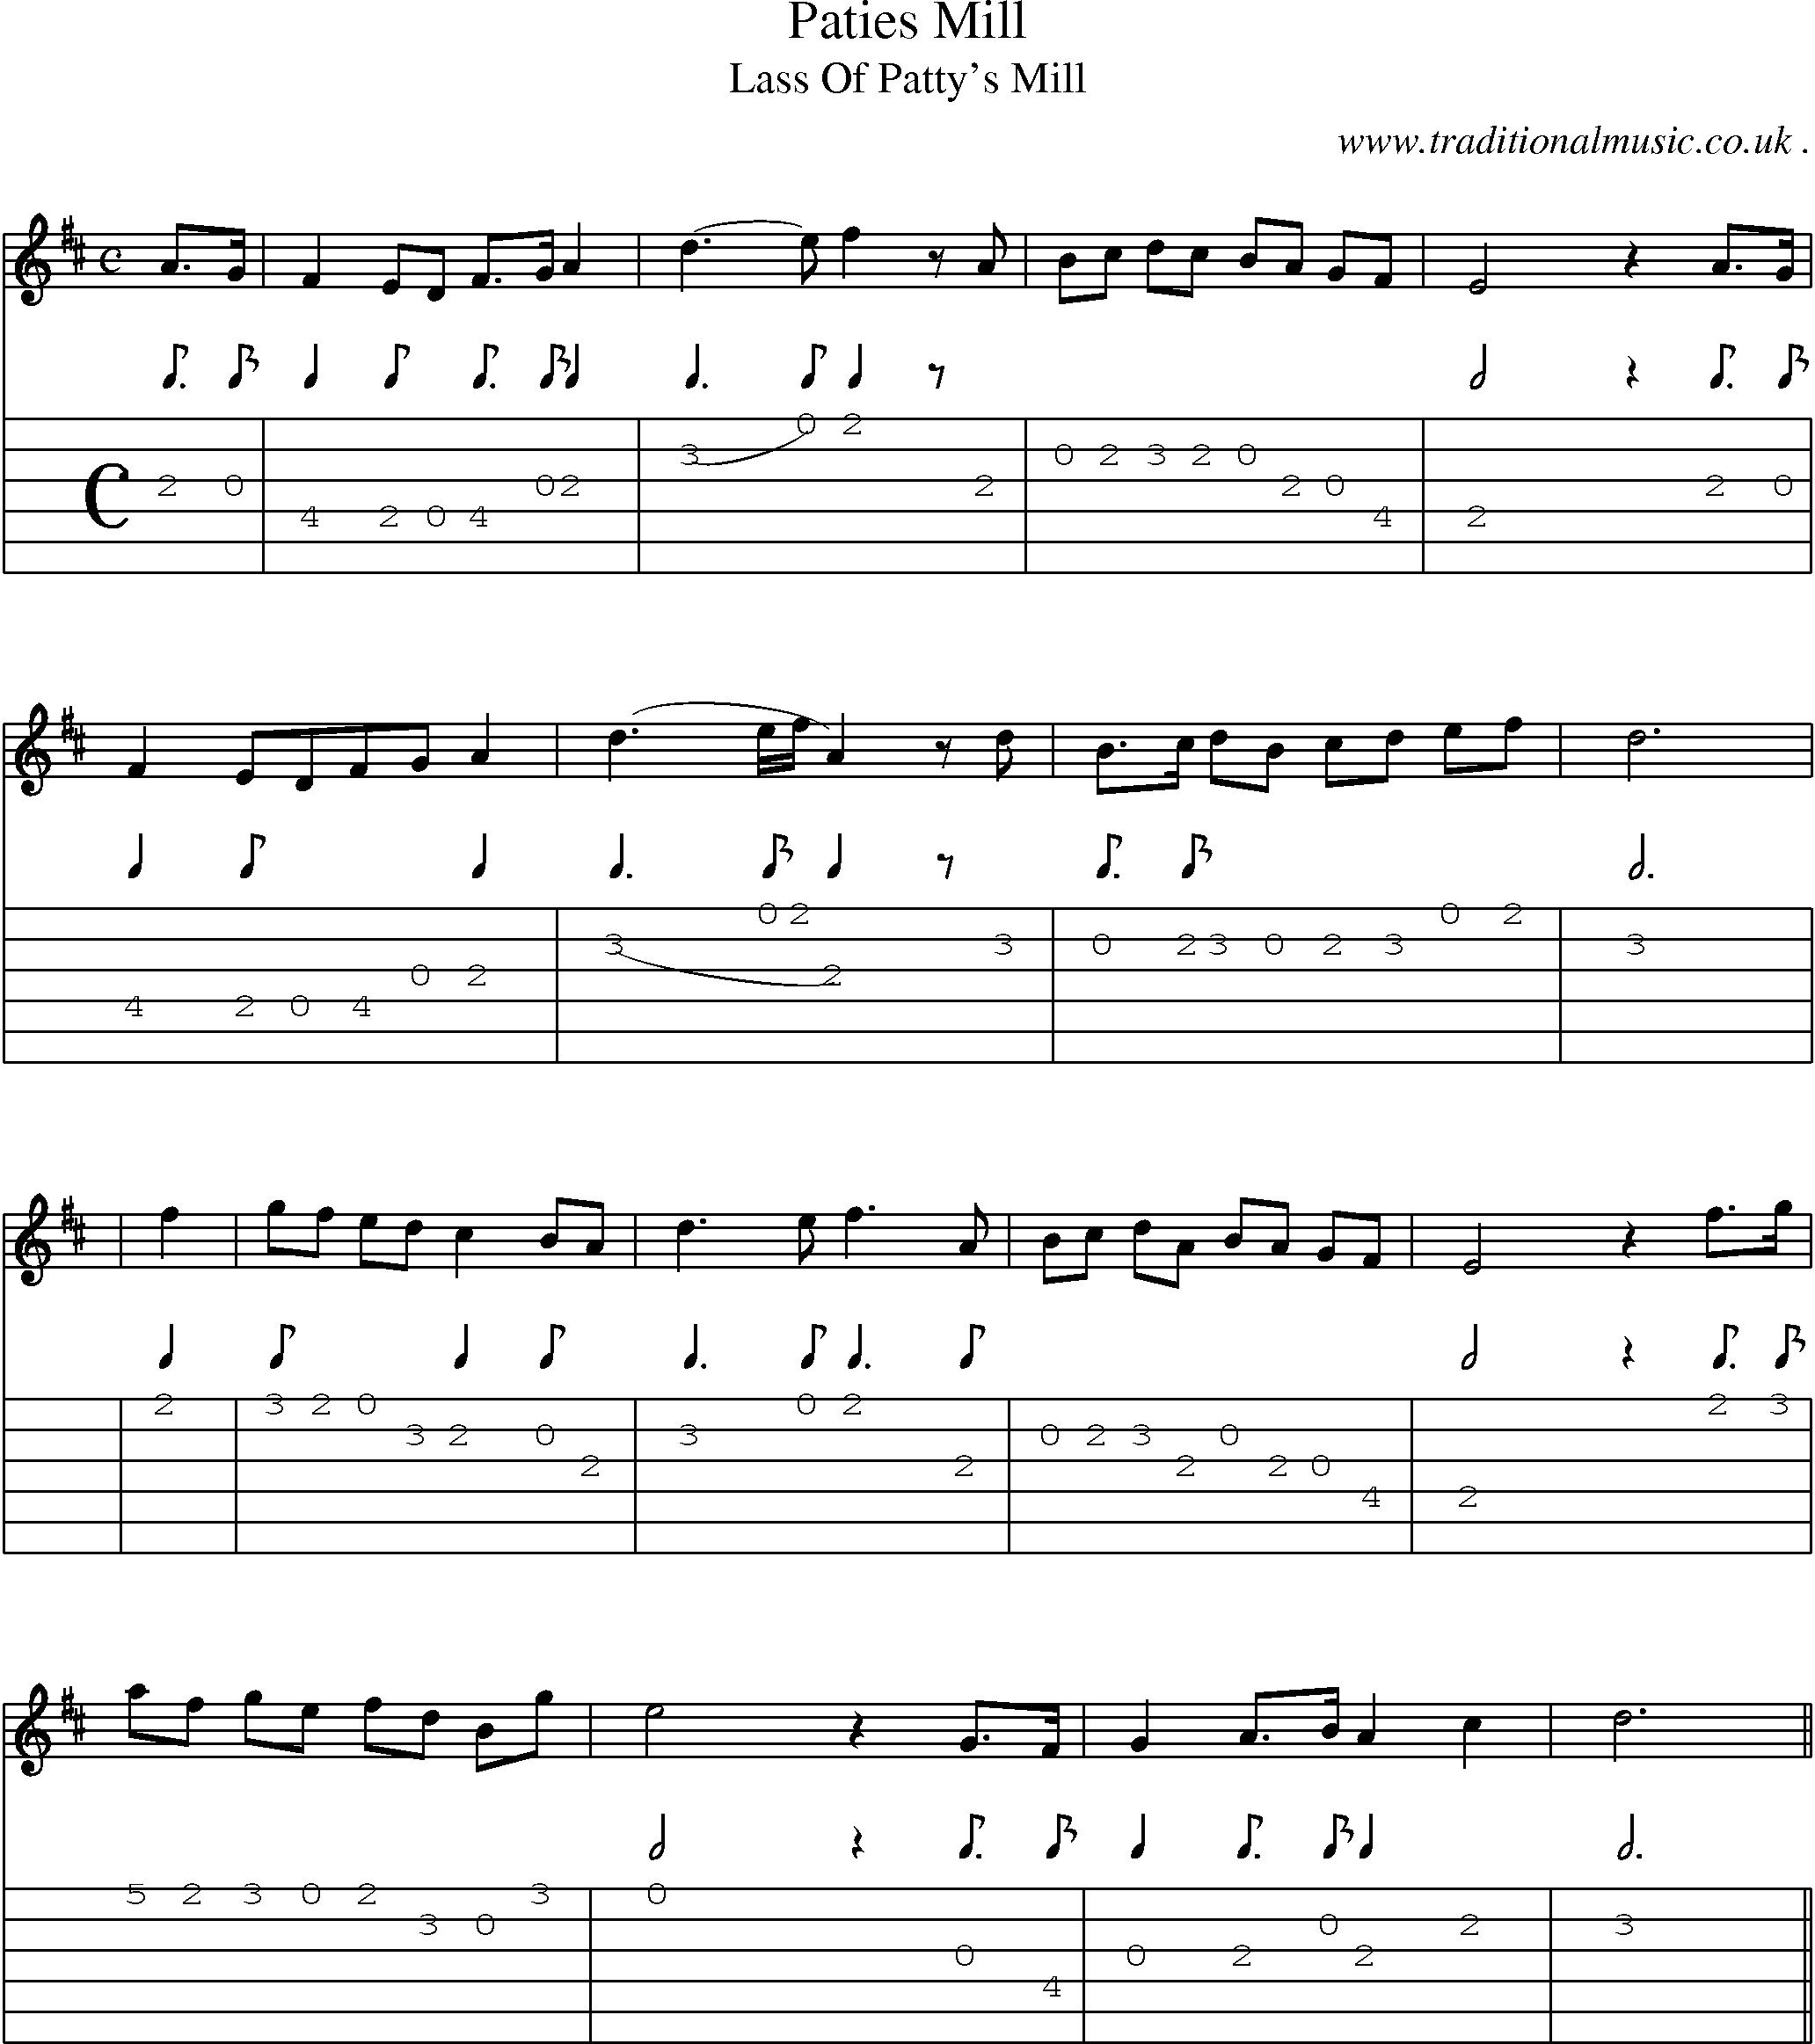 Sheet-Music and Guitar Tabs for Paties Mill